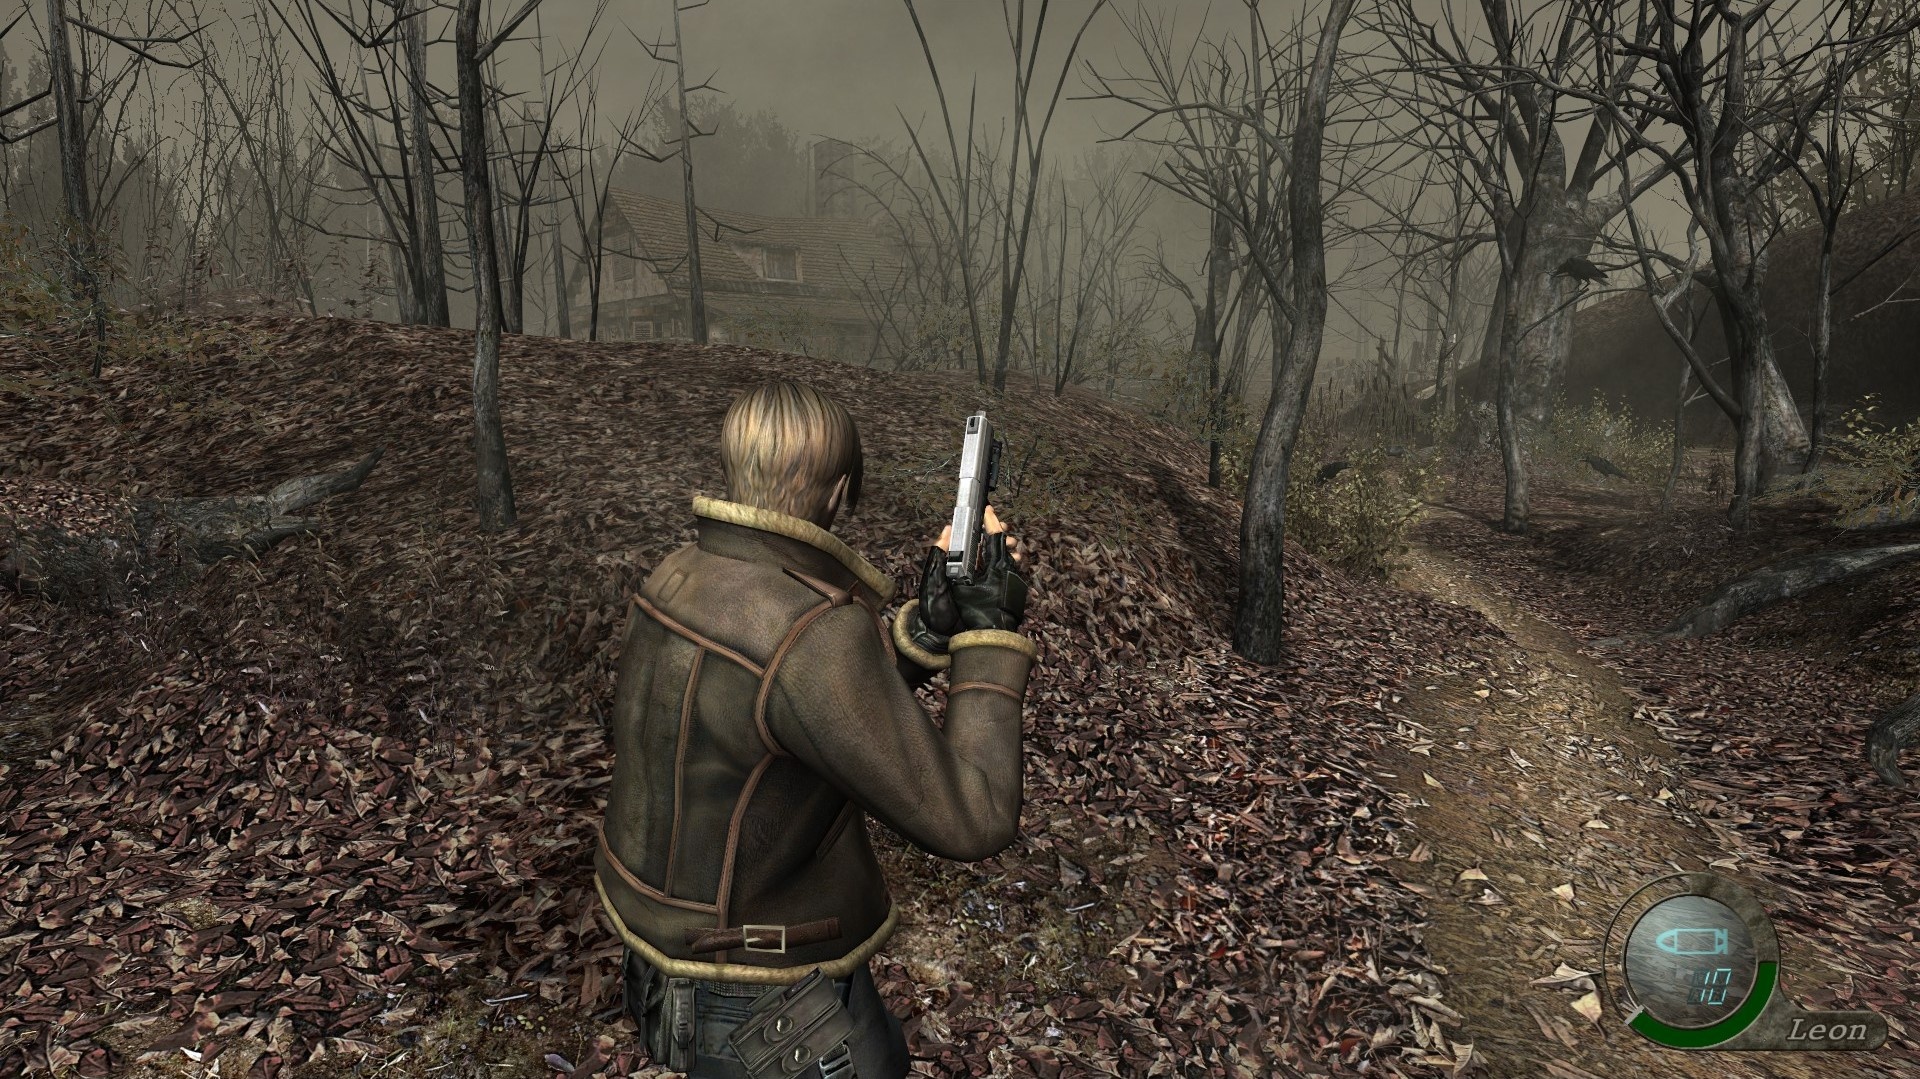 Steam resident evil 4 ultimate hd фото 95